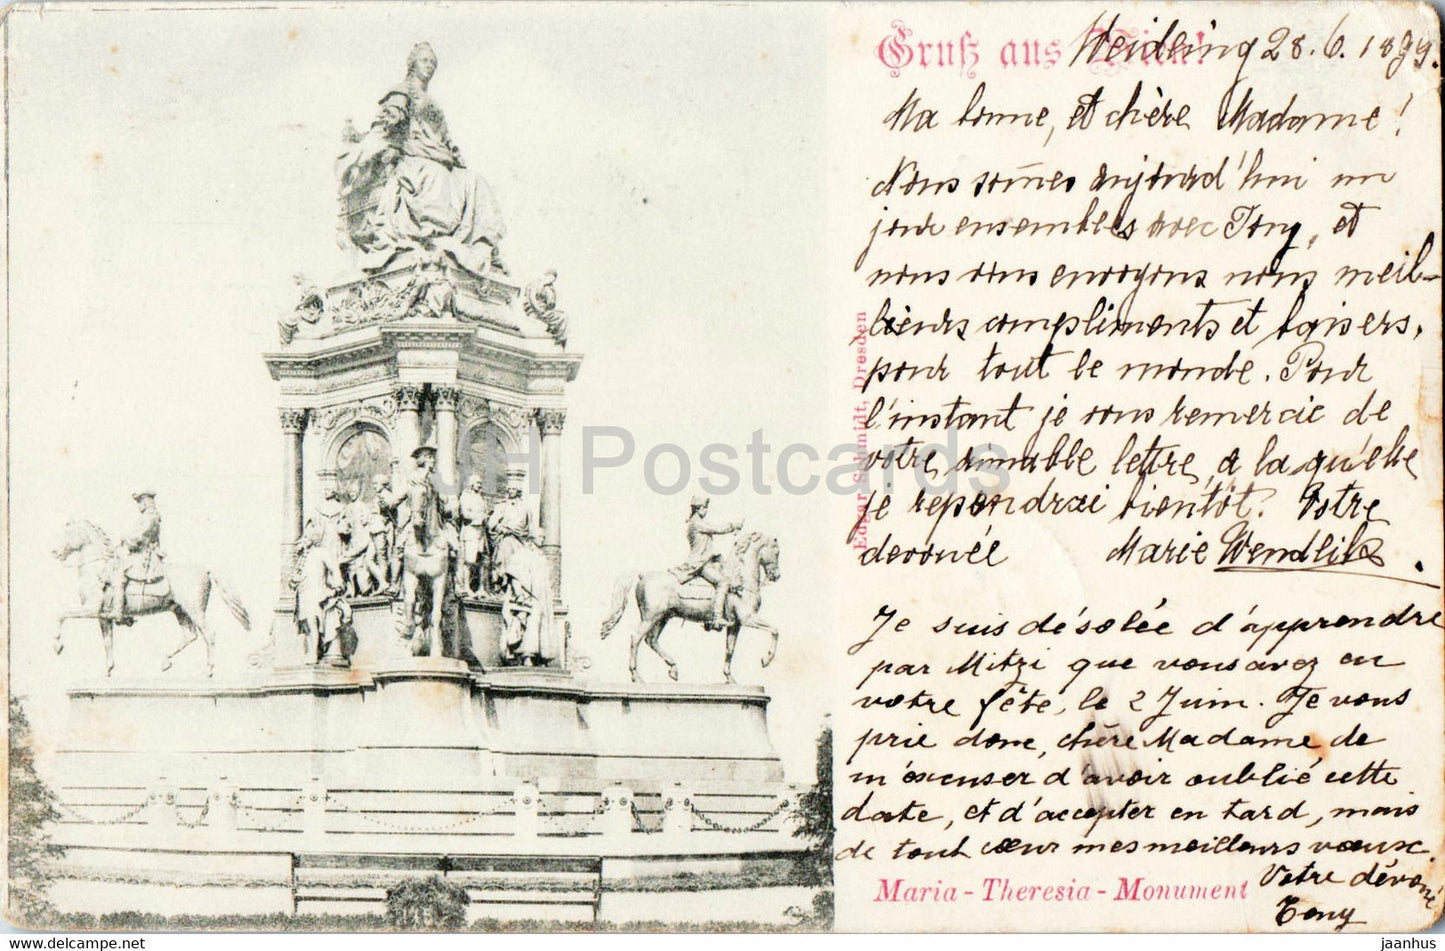 Gruss aus Wien - Maria Theresia Monument - old postcard - 1899 - Austria - used - JH Postcards